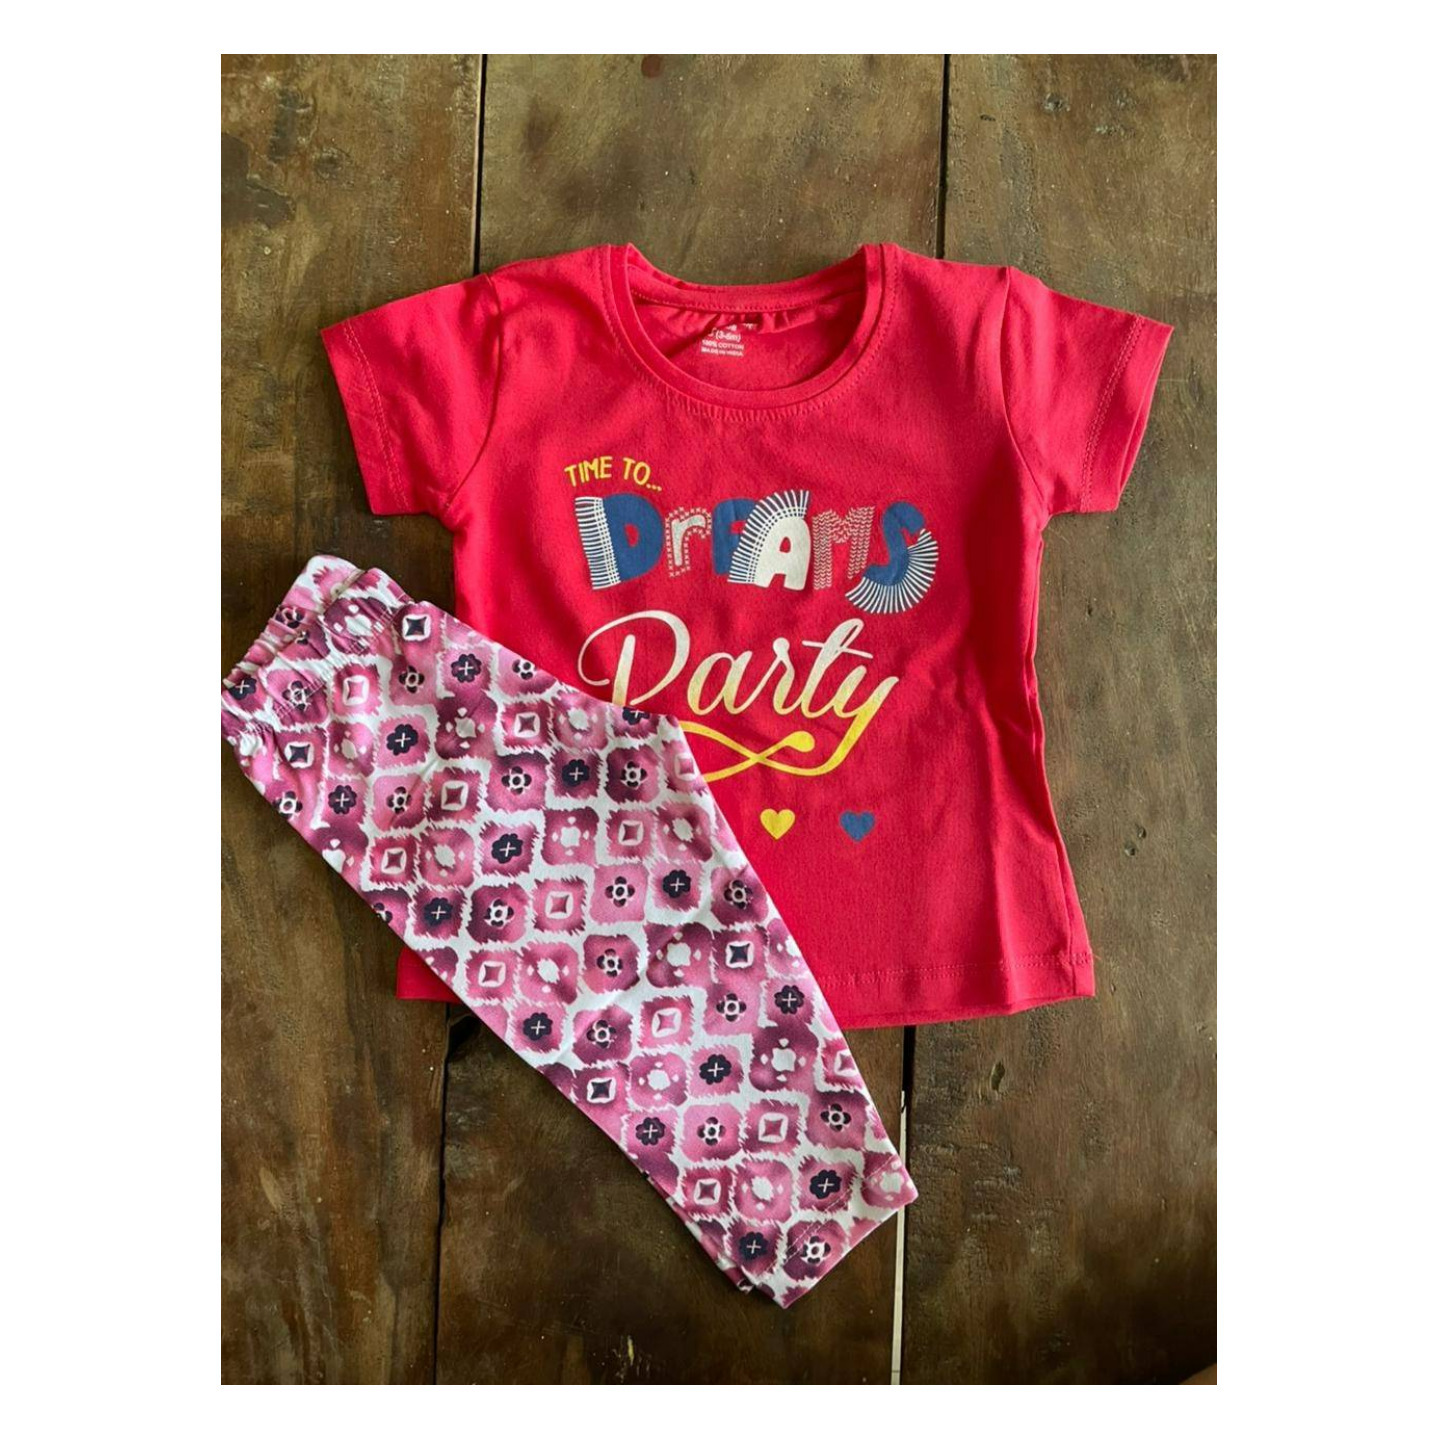 Cucumber Club Half Sleeves Top & Leggings Rs 350 Only Made In India 0 to 12 Months Size